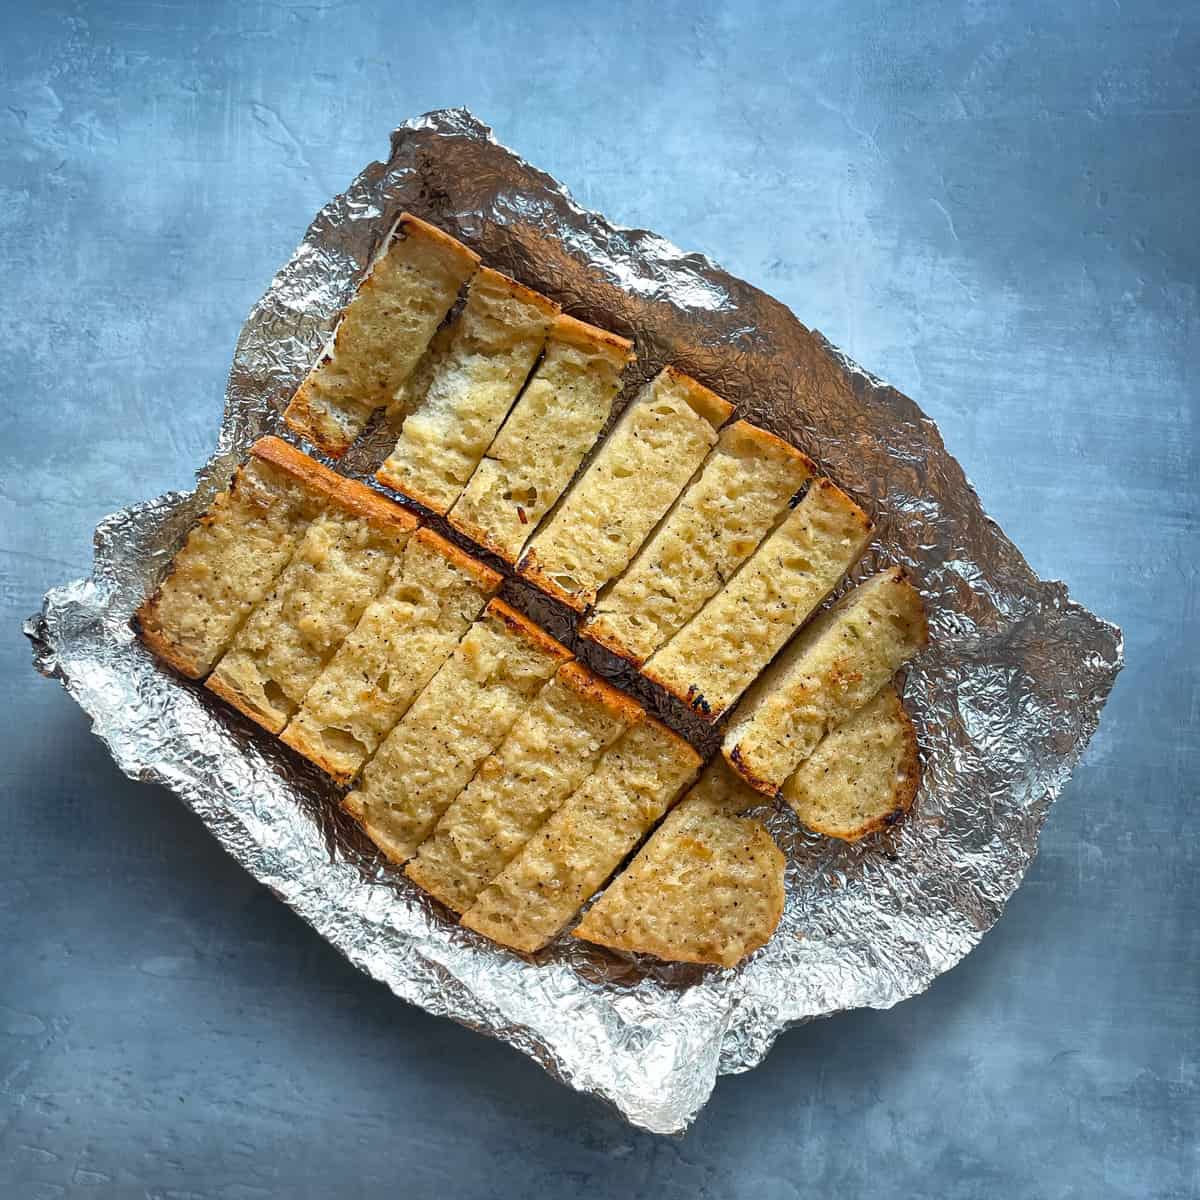 slices of two halves of a garlic bread baguette in aluminum foil.